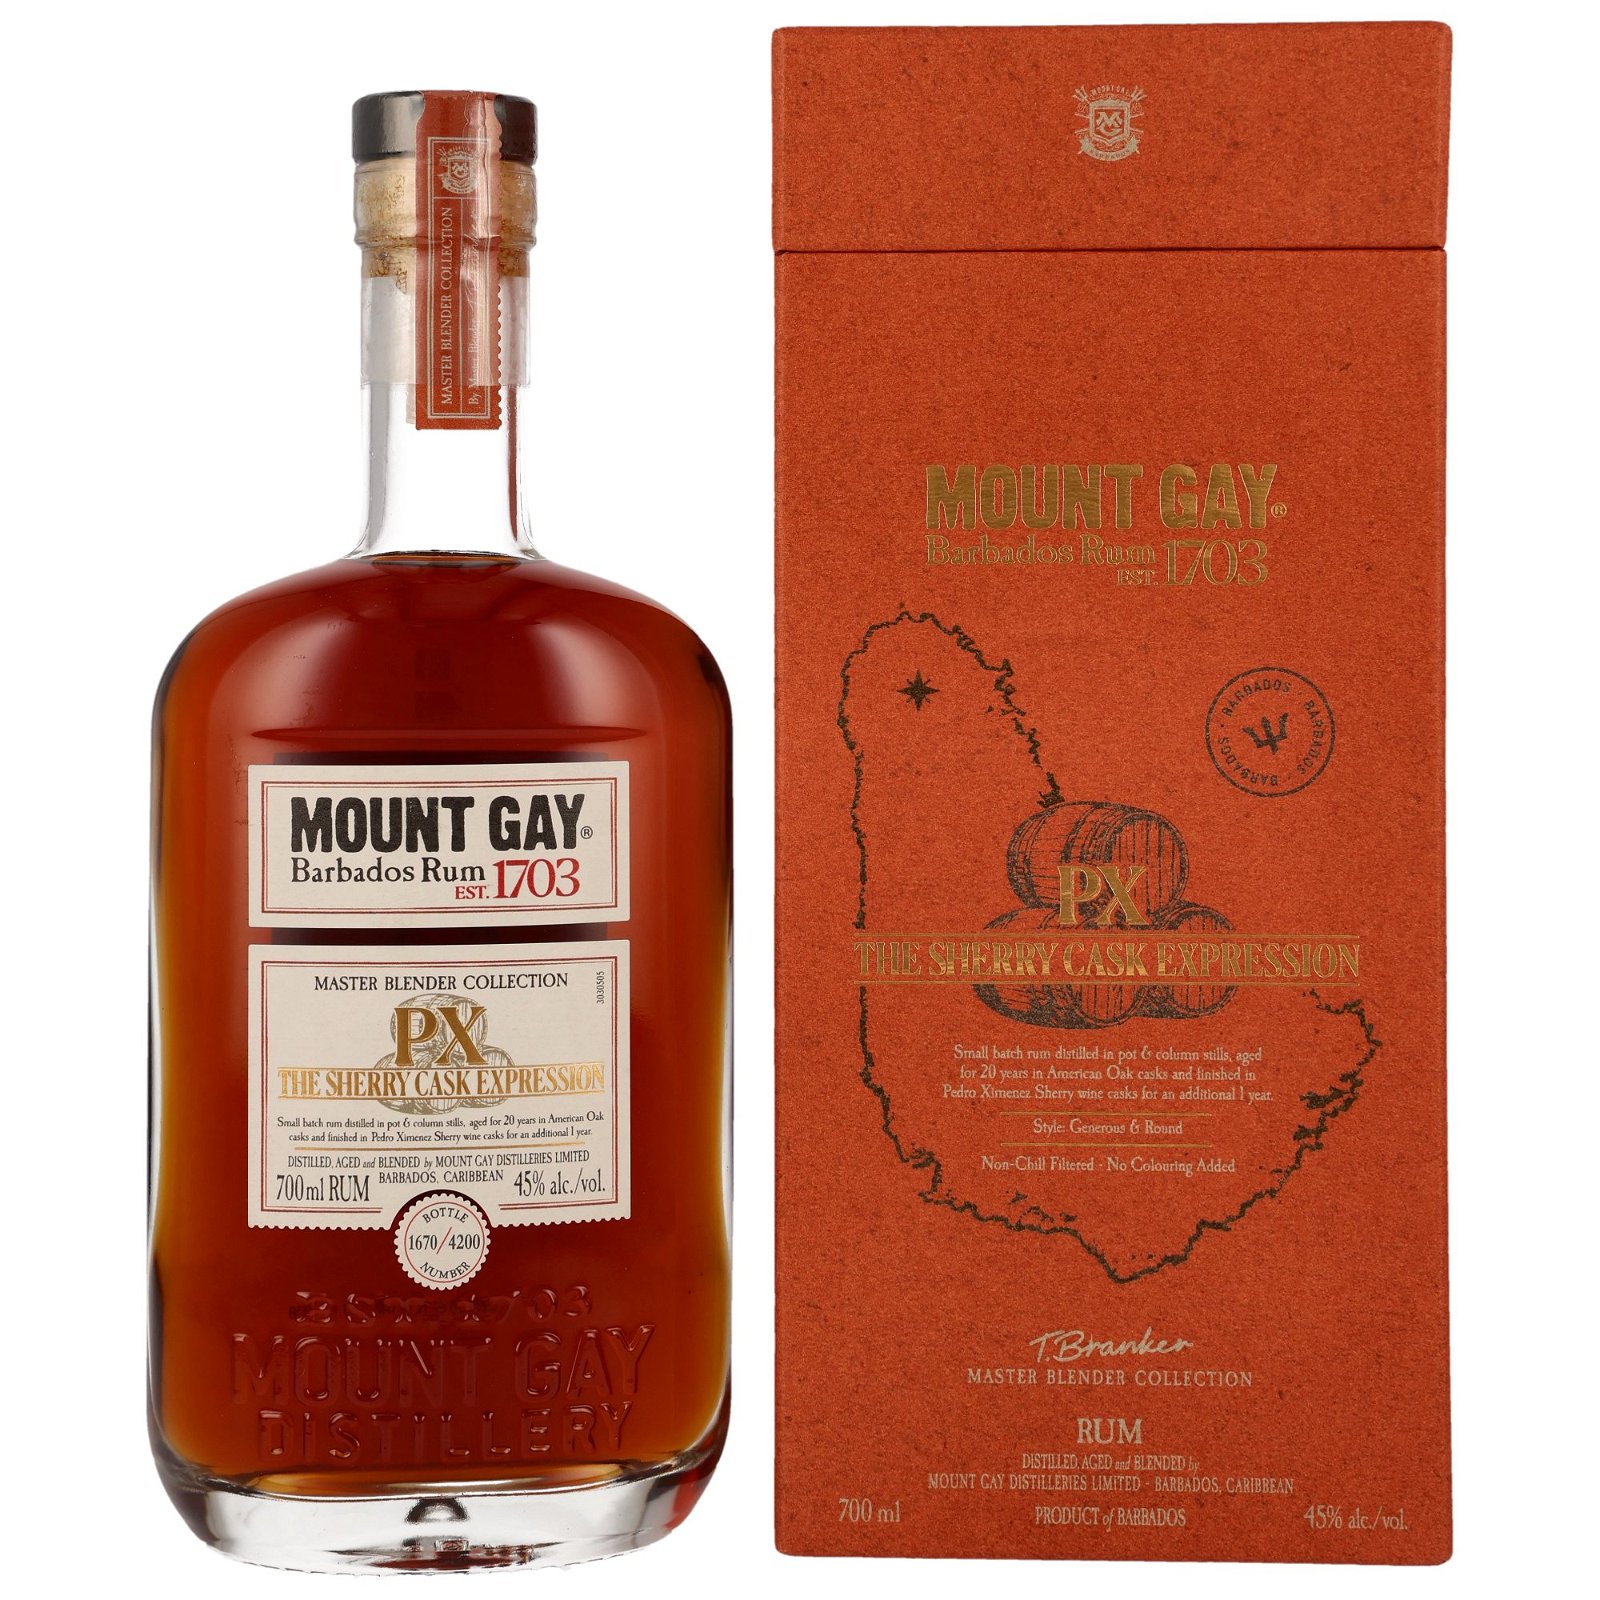 Mount Gay PX The Sherry Cask Expression